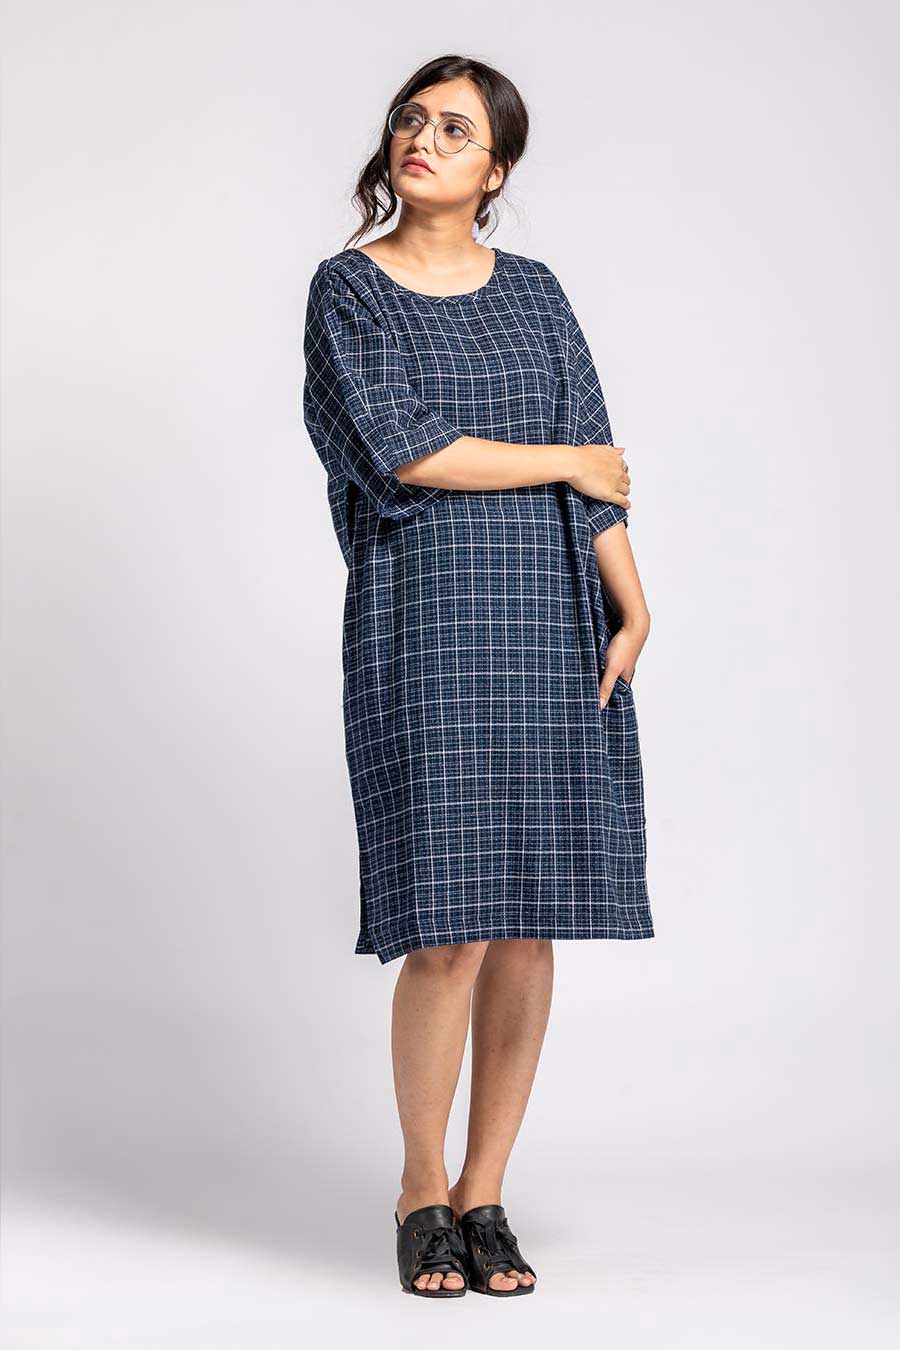 Idle Noon Checkered Blue Dress